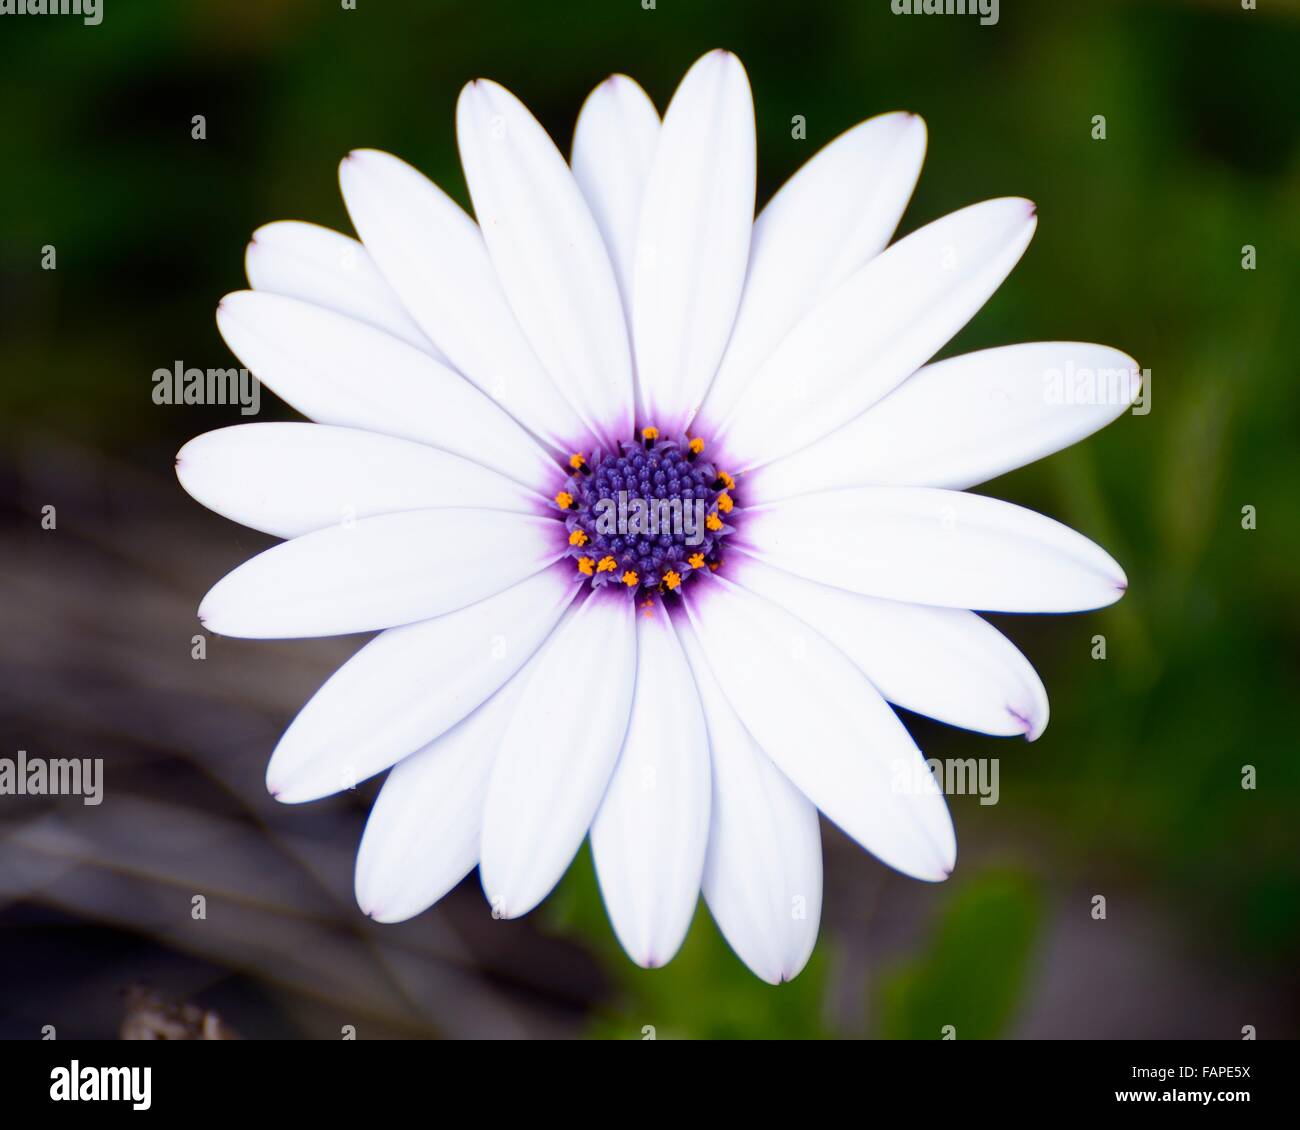 white and purple daisy in the garden Stock Photo